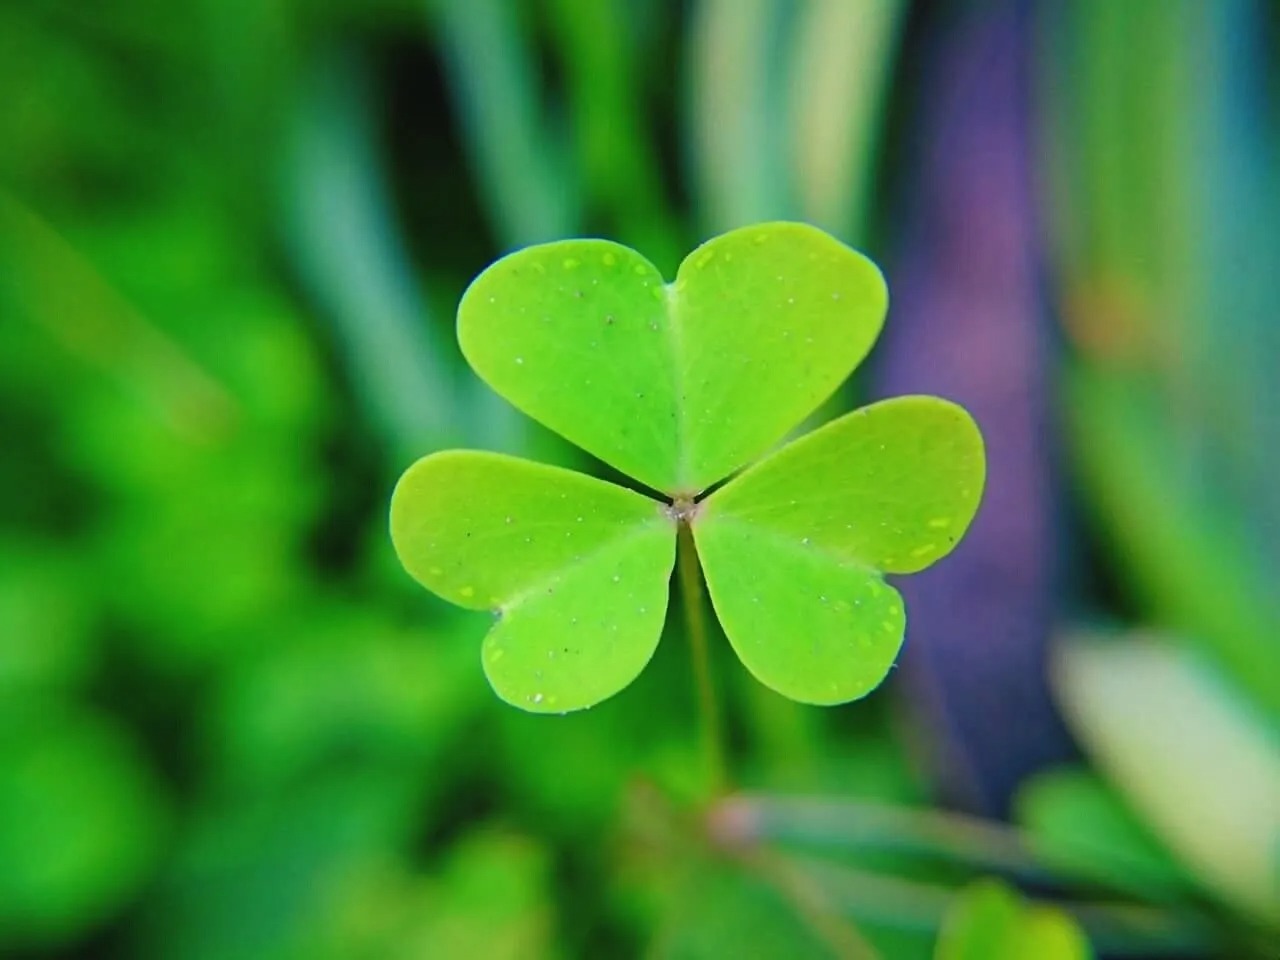 The Average Person Can Score 15/26 on This Trivia Quiz, So to Impress Me, You’ll Have to Score Least 20 Shamrock